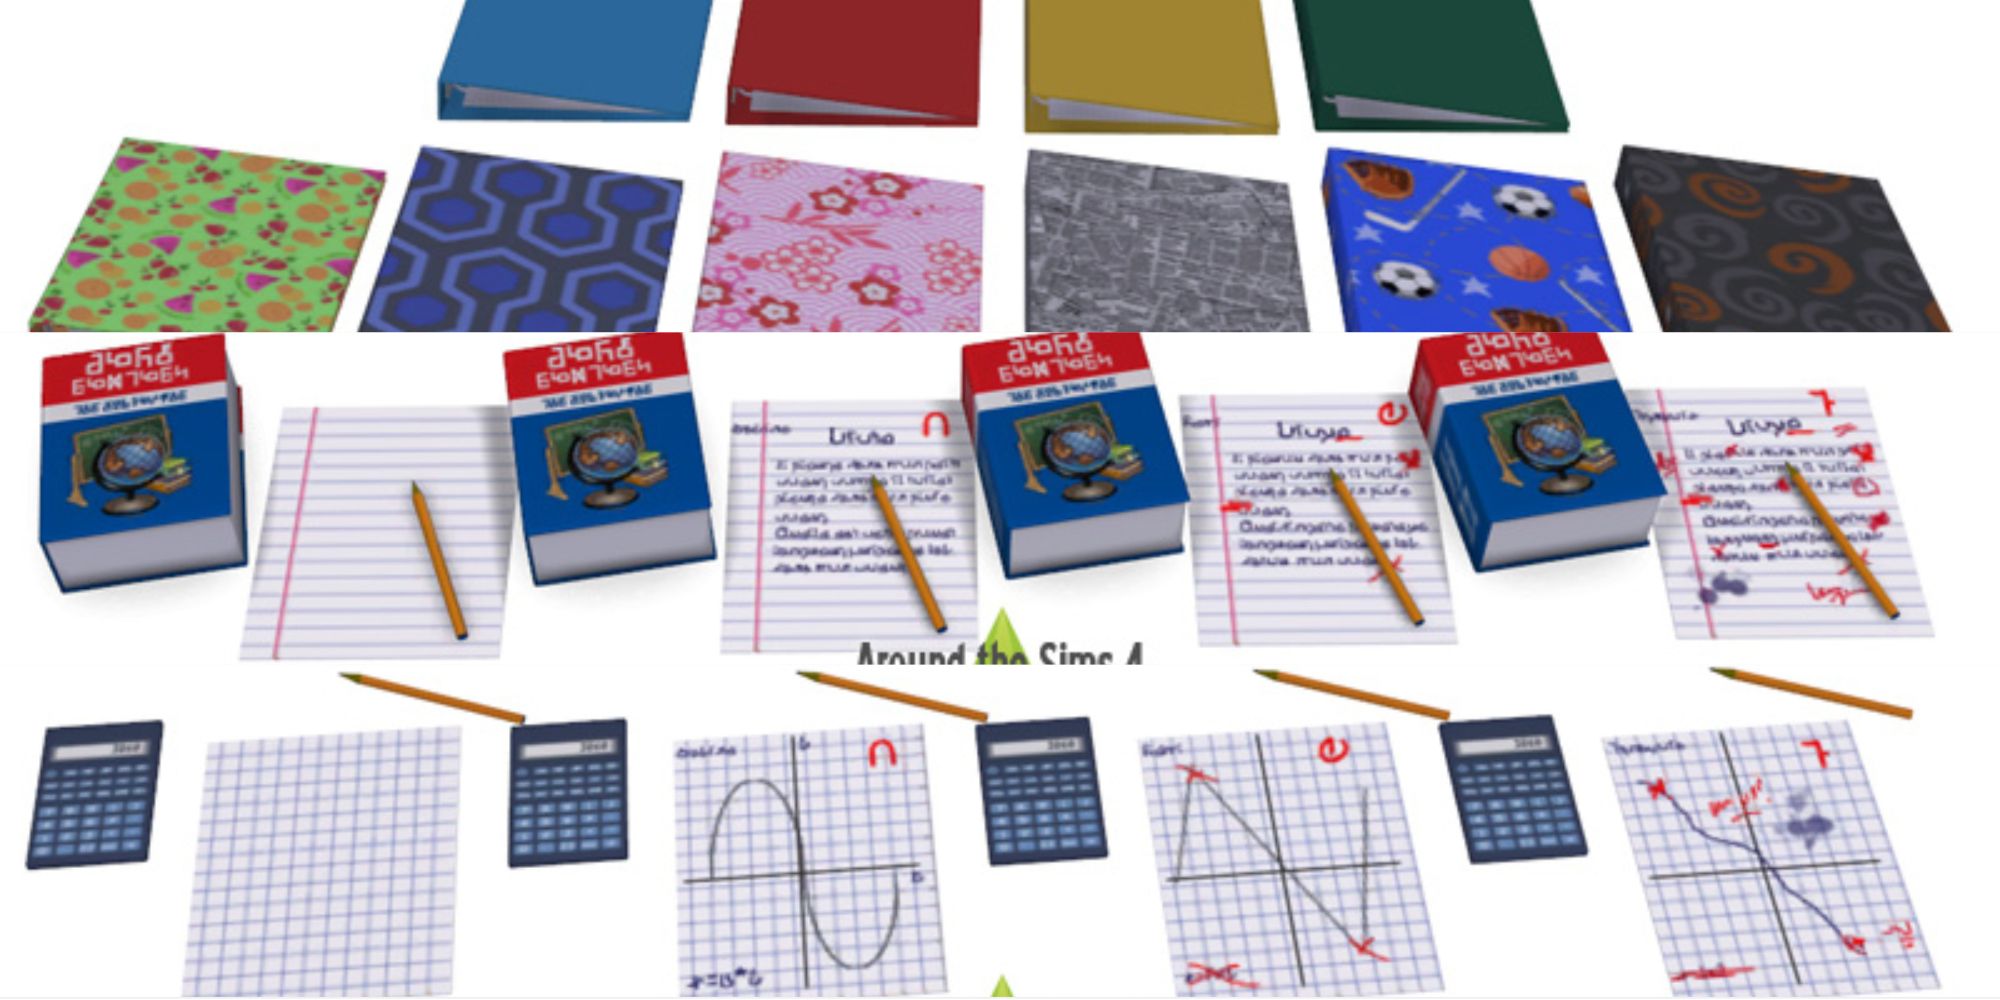 School supplies cc for the sims 4